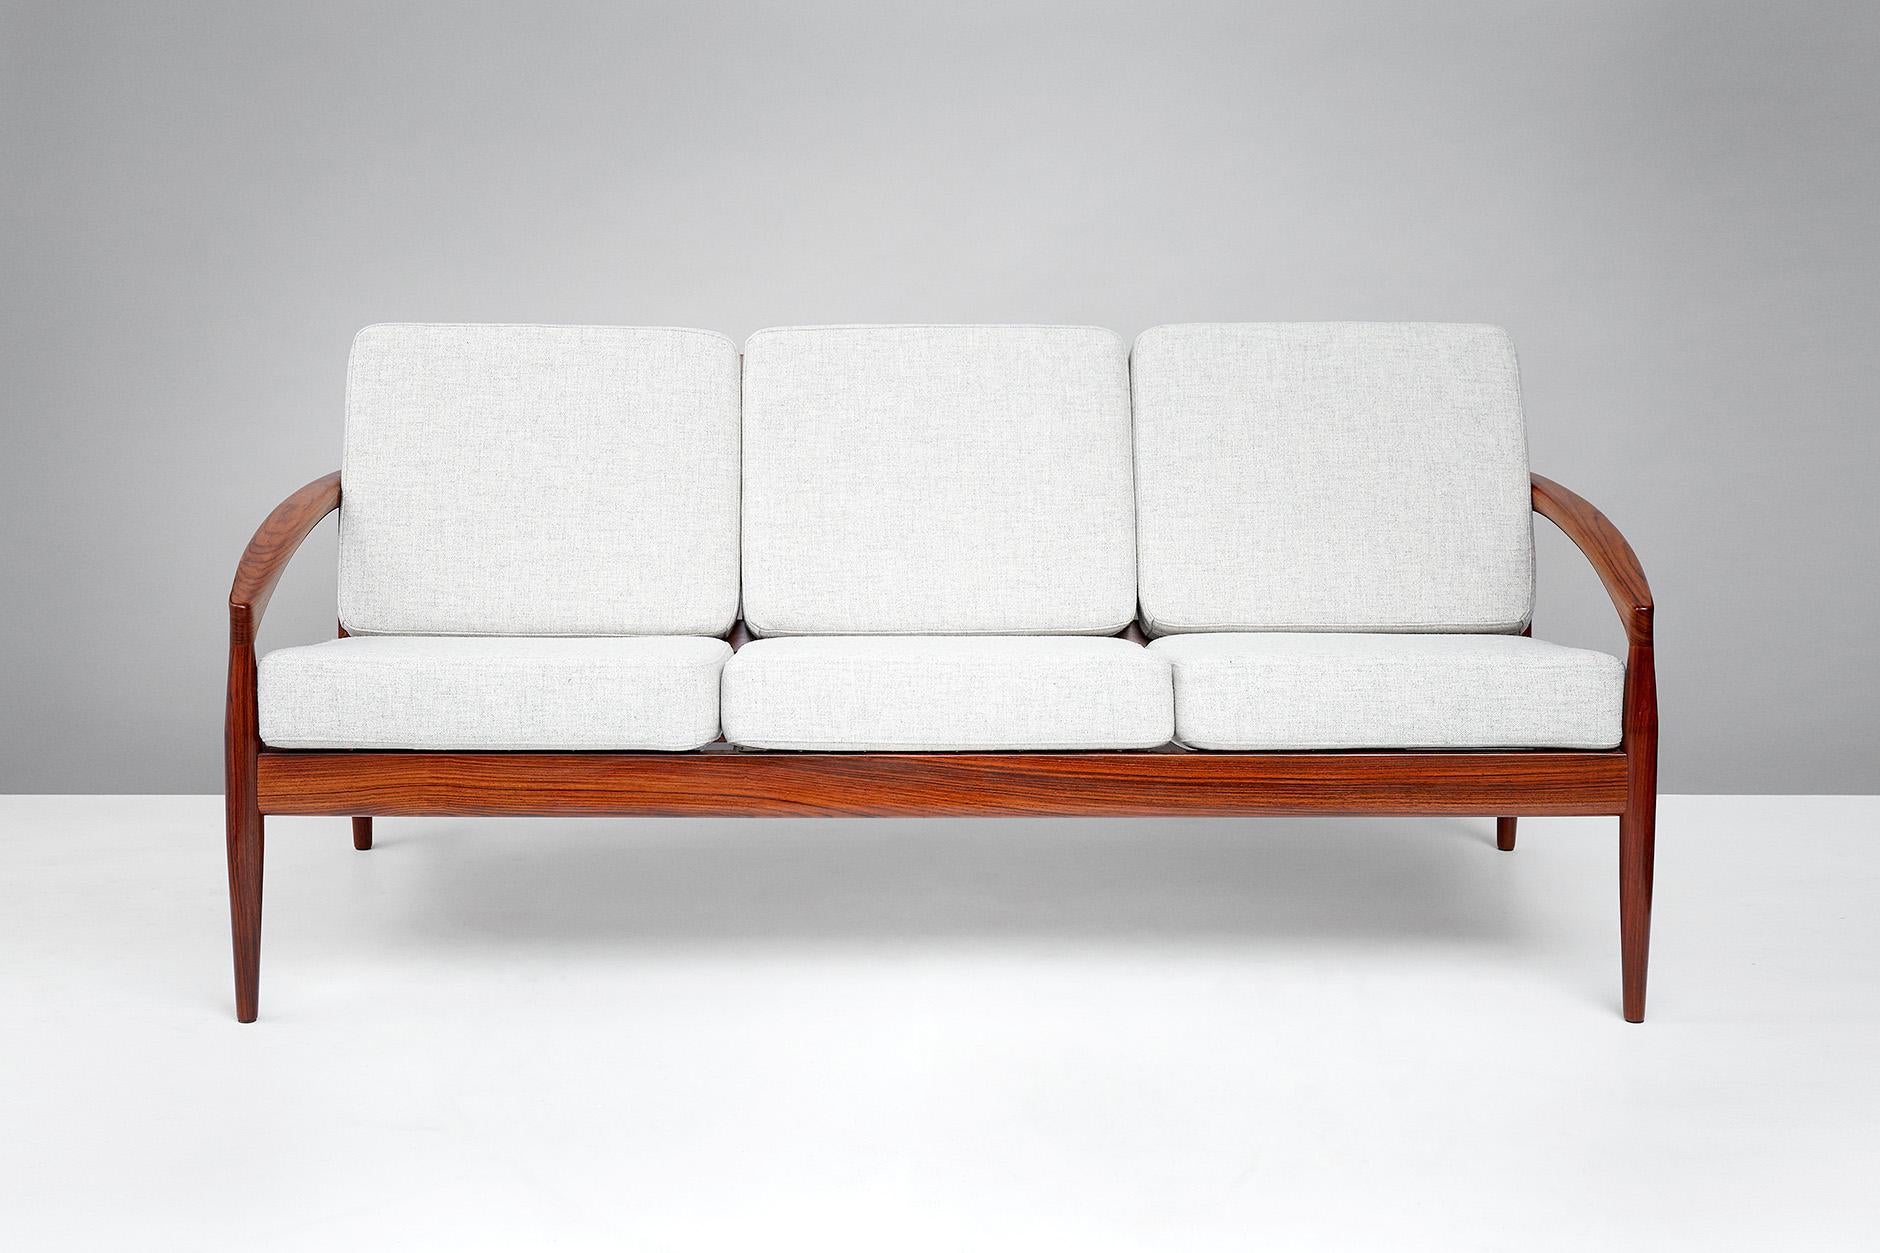 Kai Kristiansen.

Paper Knife sofa, 1955.

Produced by Magnus Olesen, Denmark. Rarely seen example of the three person sofa made from rosewood. New cushions covered in Kvadrat Tonica wool fabric.